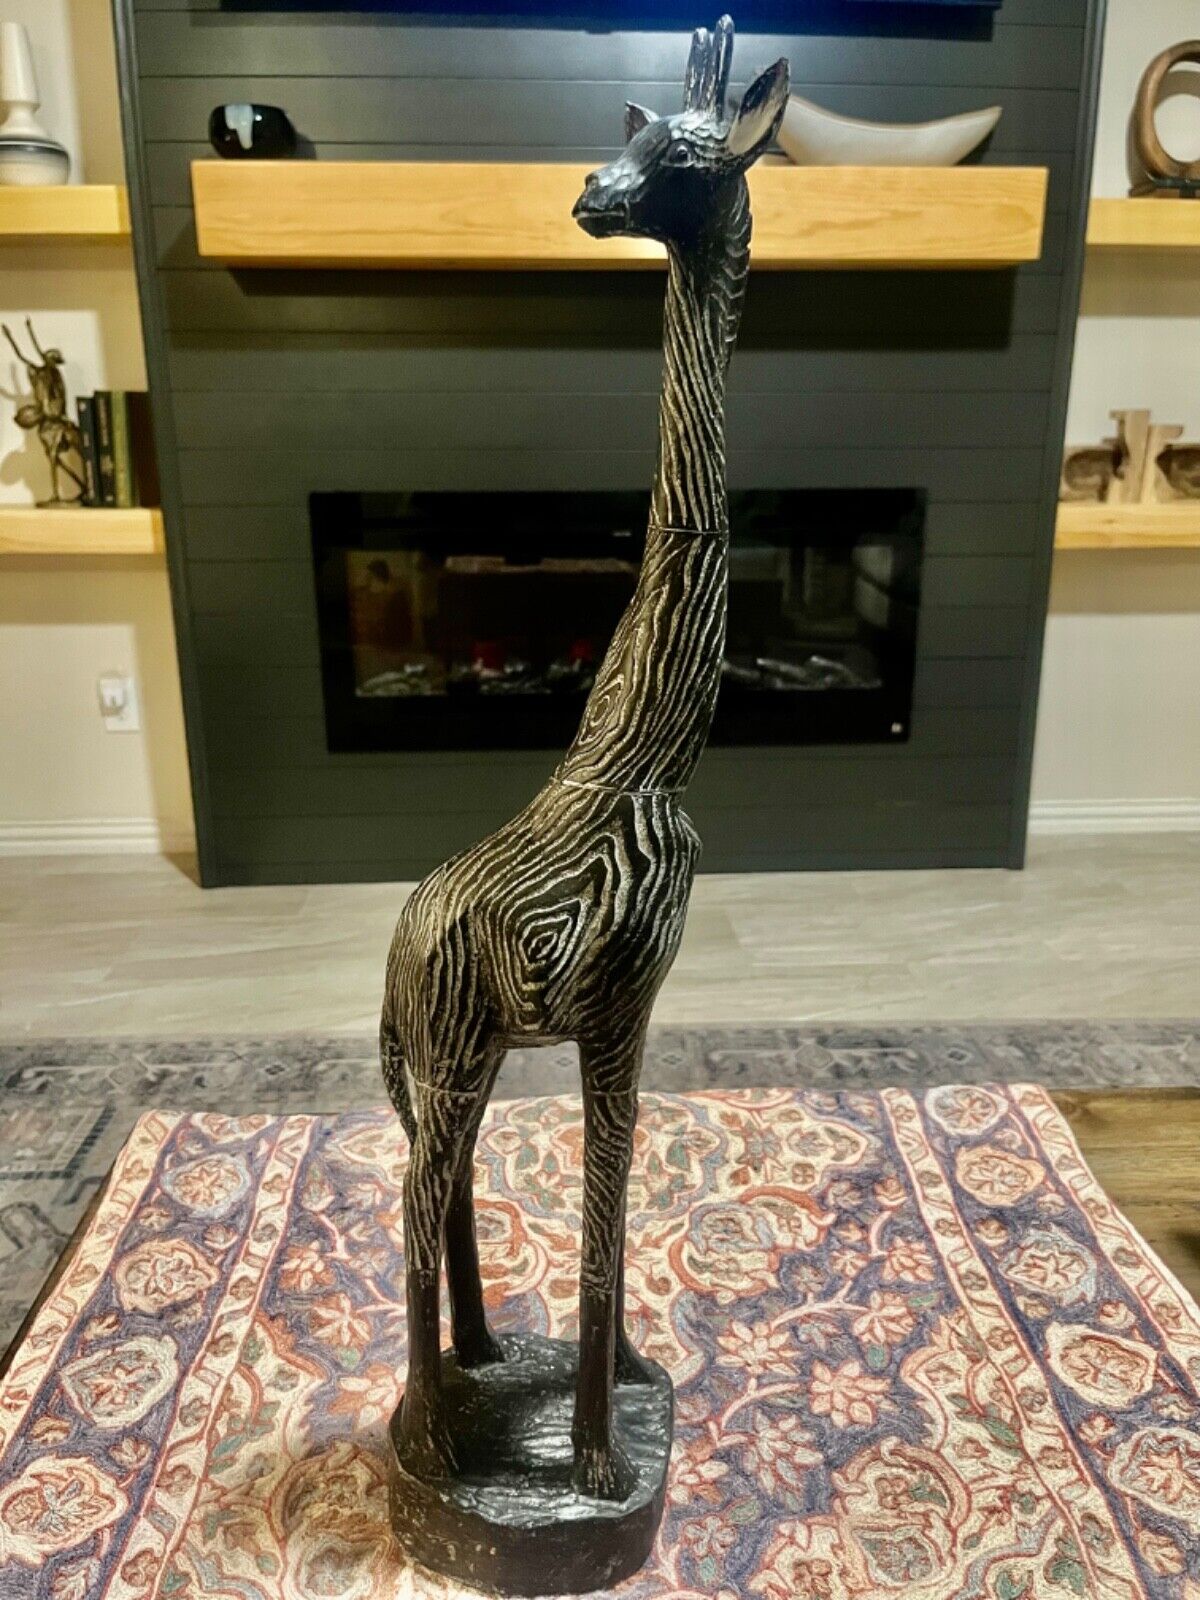 An elegant statuesque resin Giraffe with black& silver textured surface